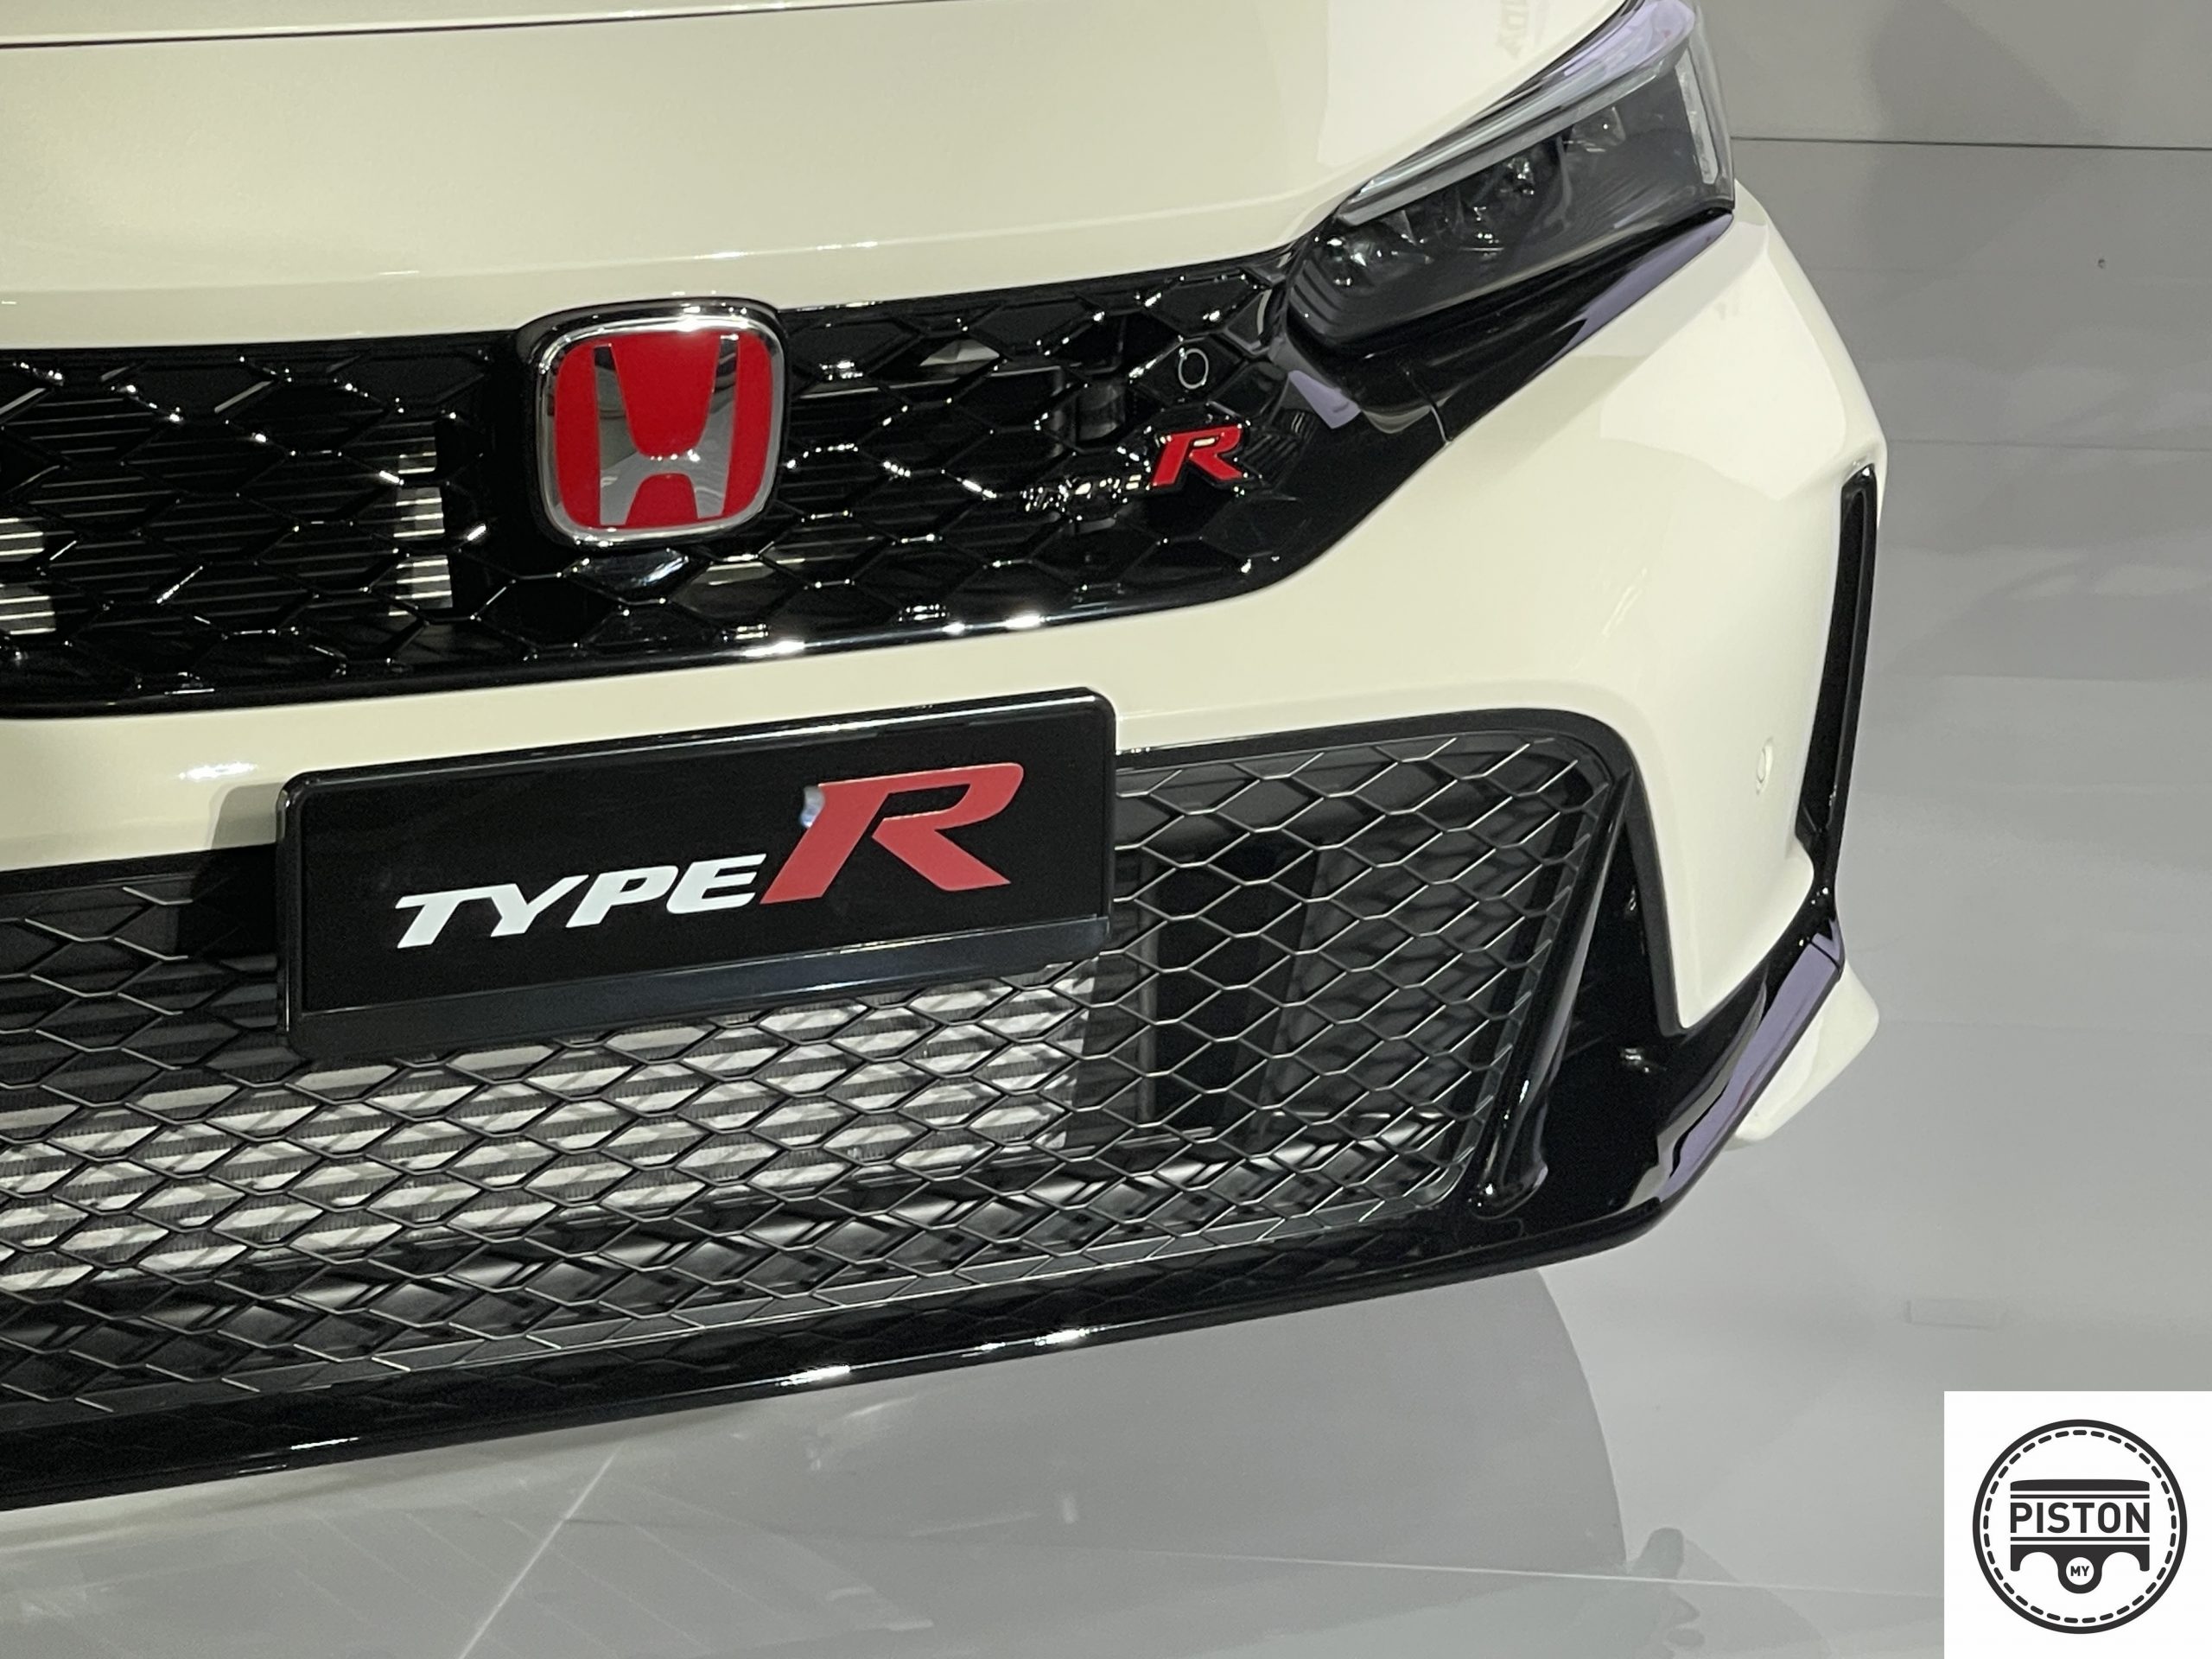 2023 honda civic type r launched in malaysia – rm399,900